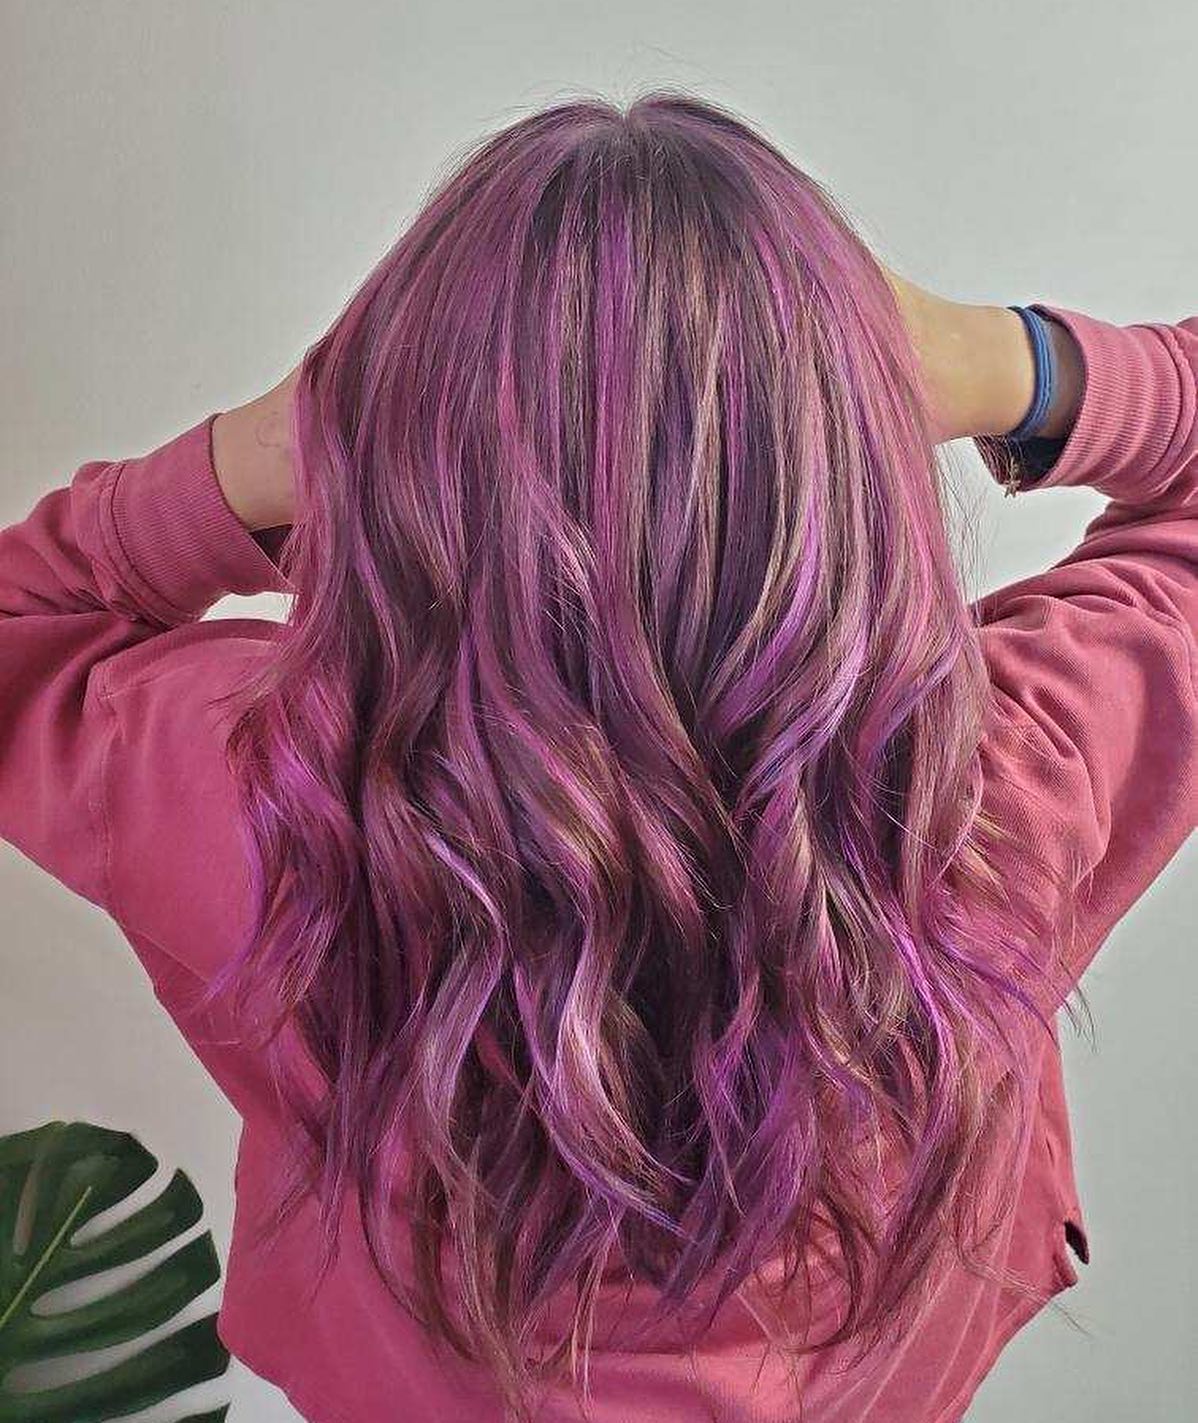 52 Pink and Purple Hair Color Ideas That Will Amaze You + Video